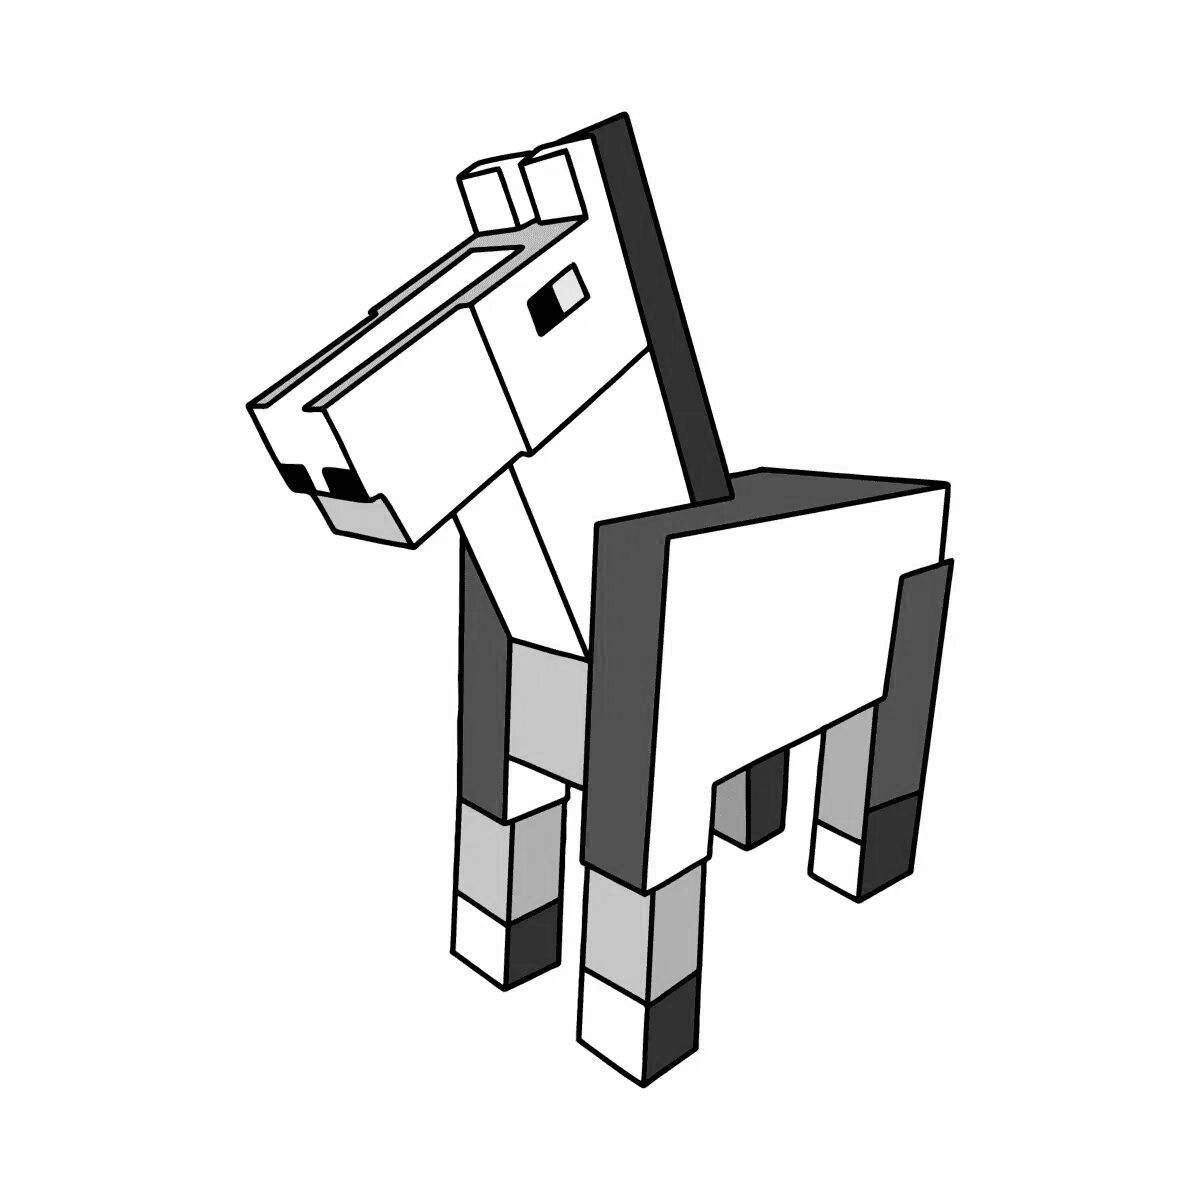 Animated minecraft horse coloring page